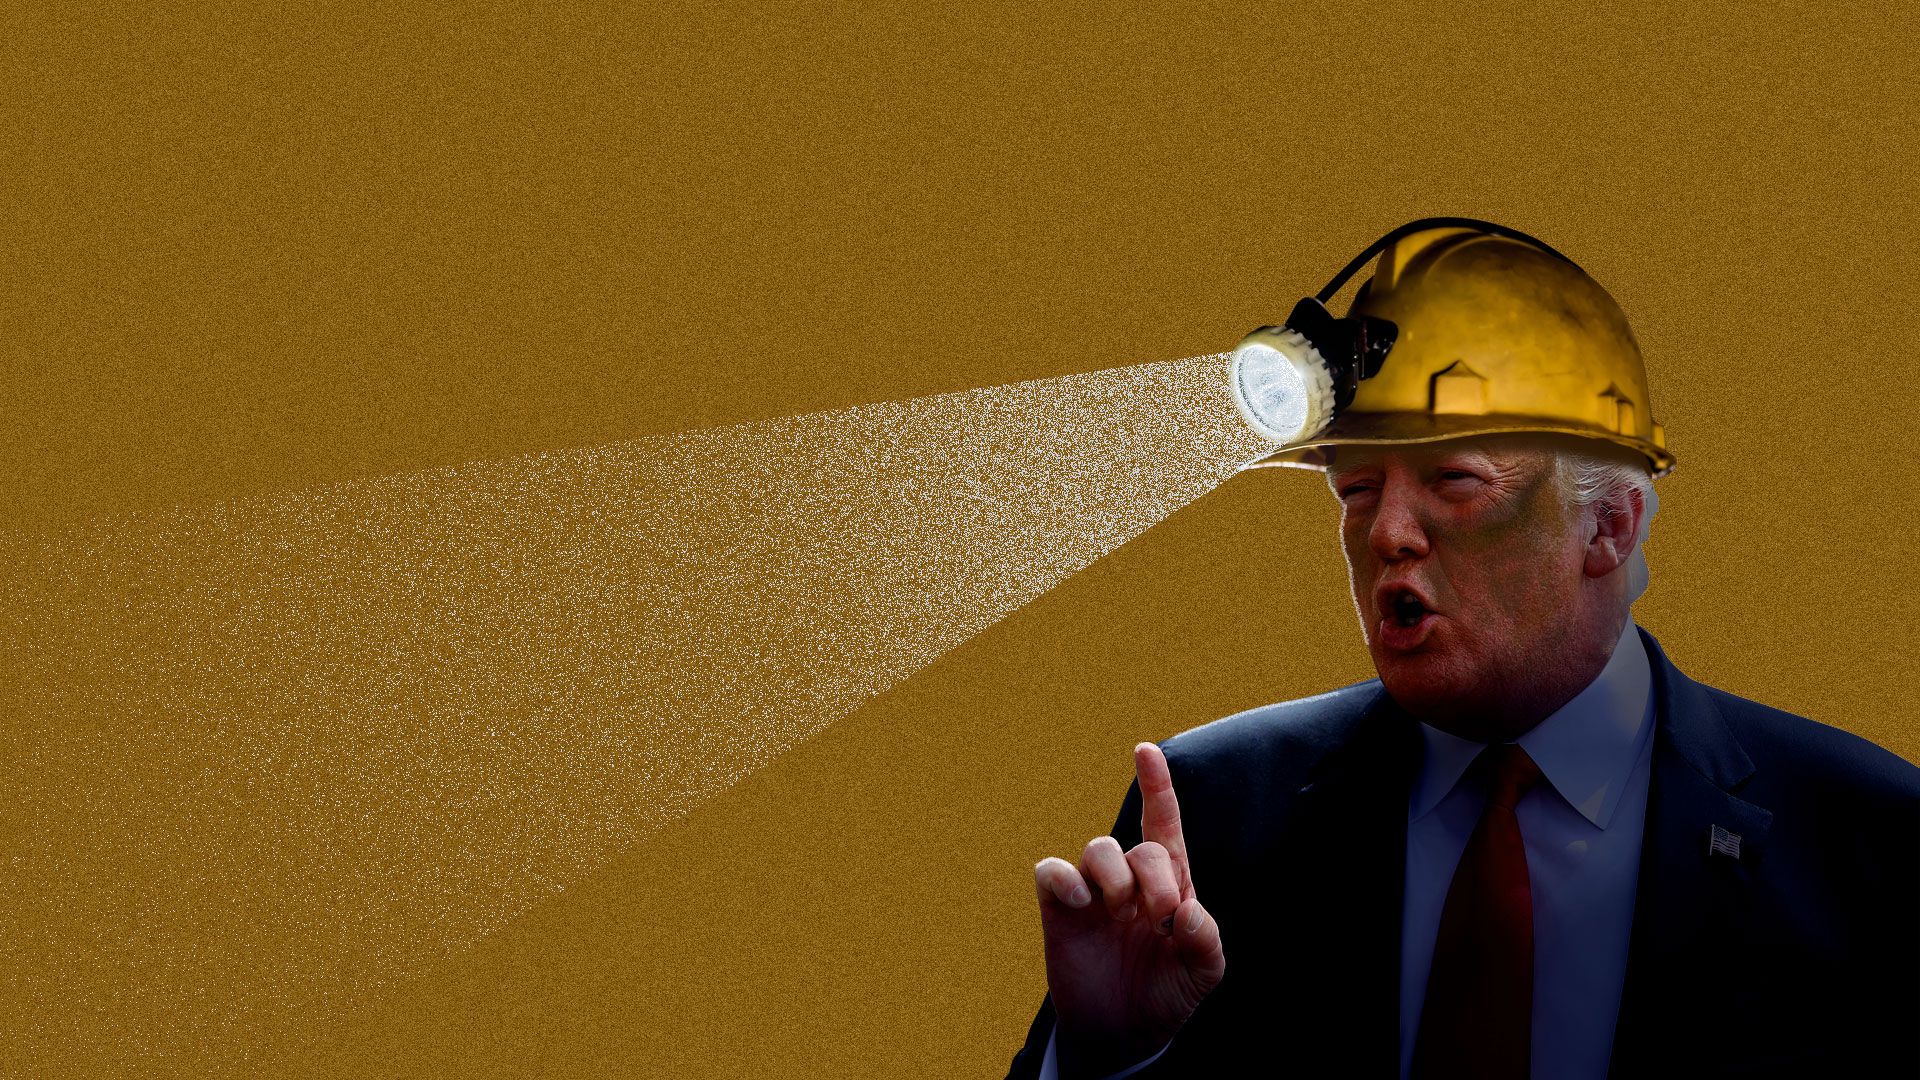 Donald Trump wearing a mining hat with an attached flashlight